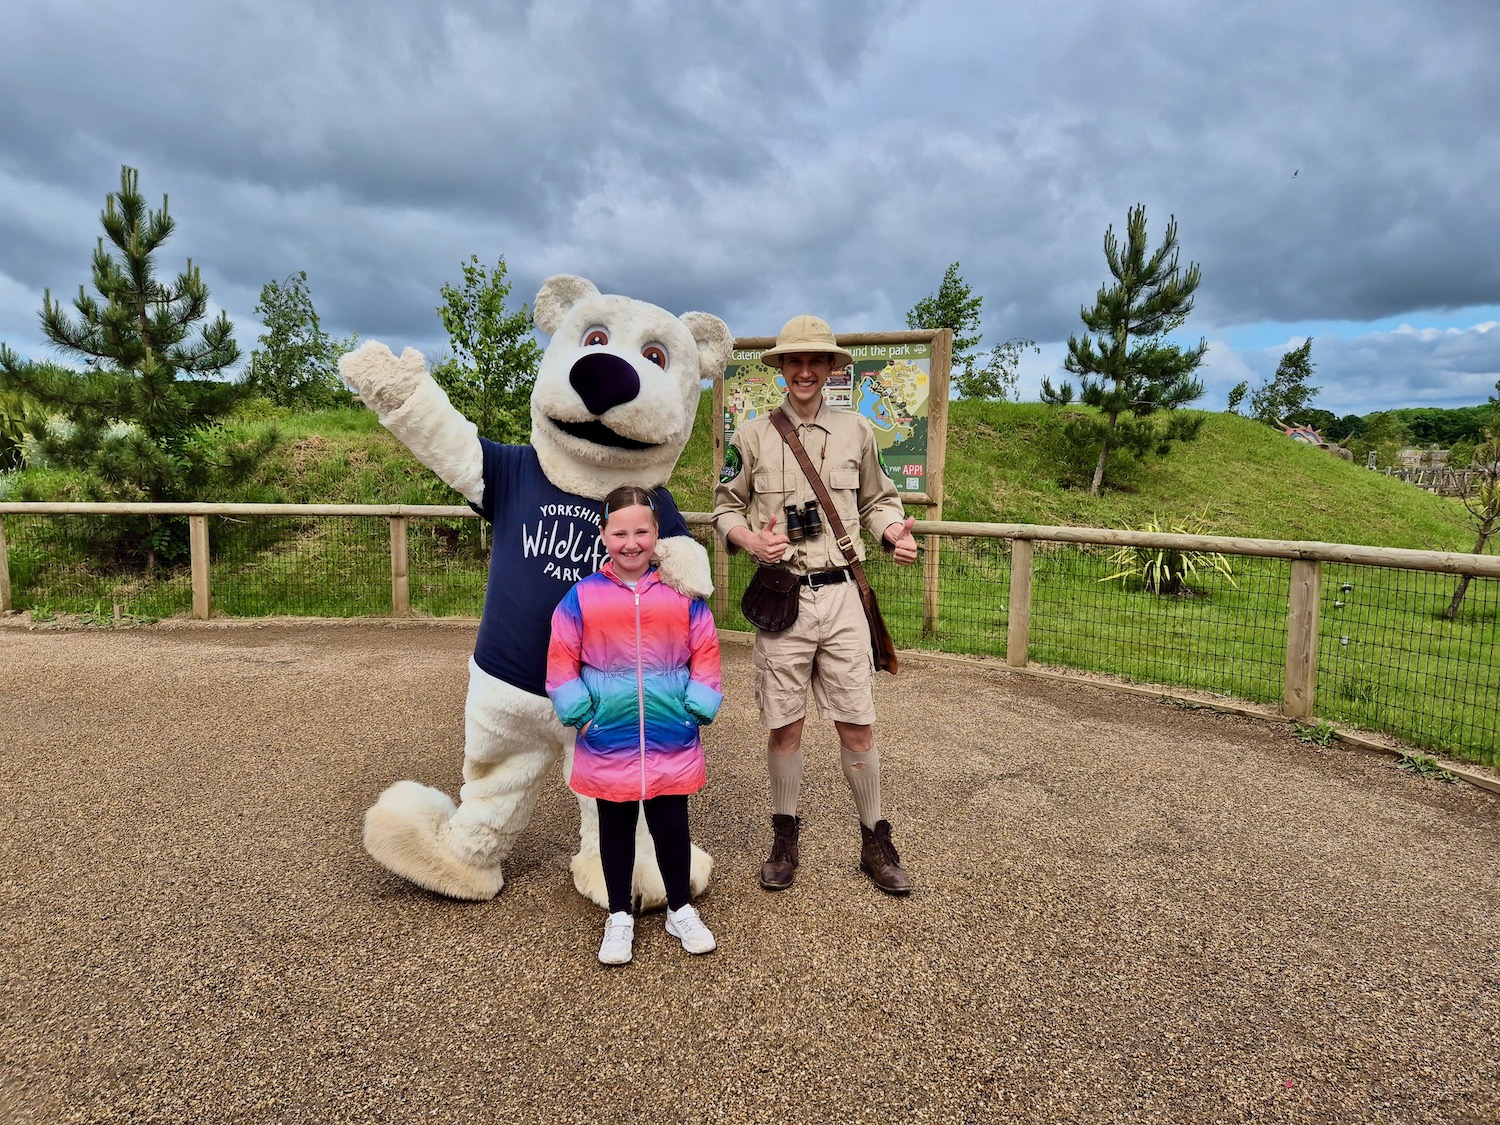 Erin with a mascot at the entrance to Yorkshire Wildlife Park